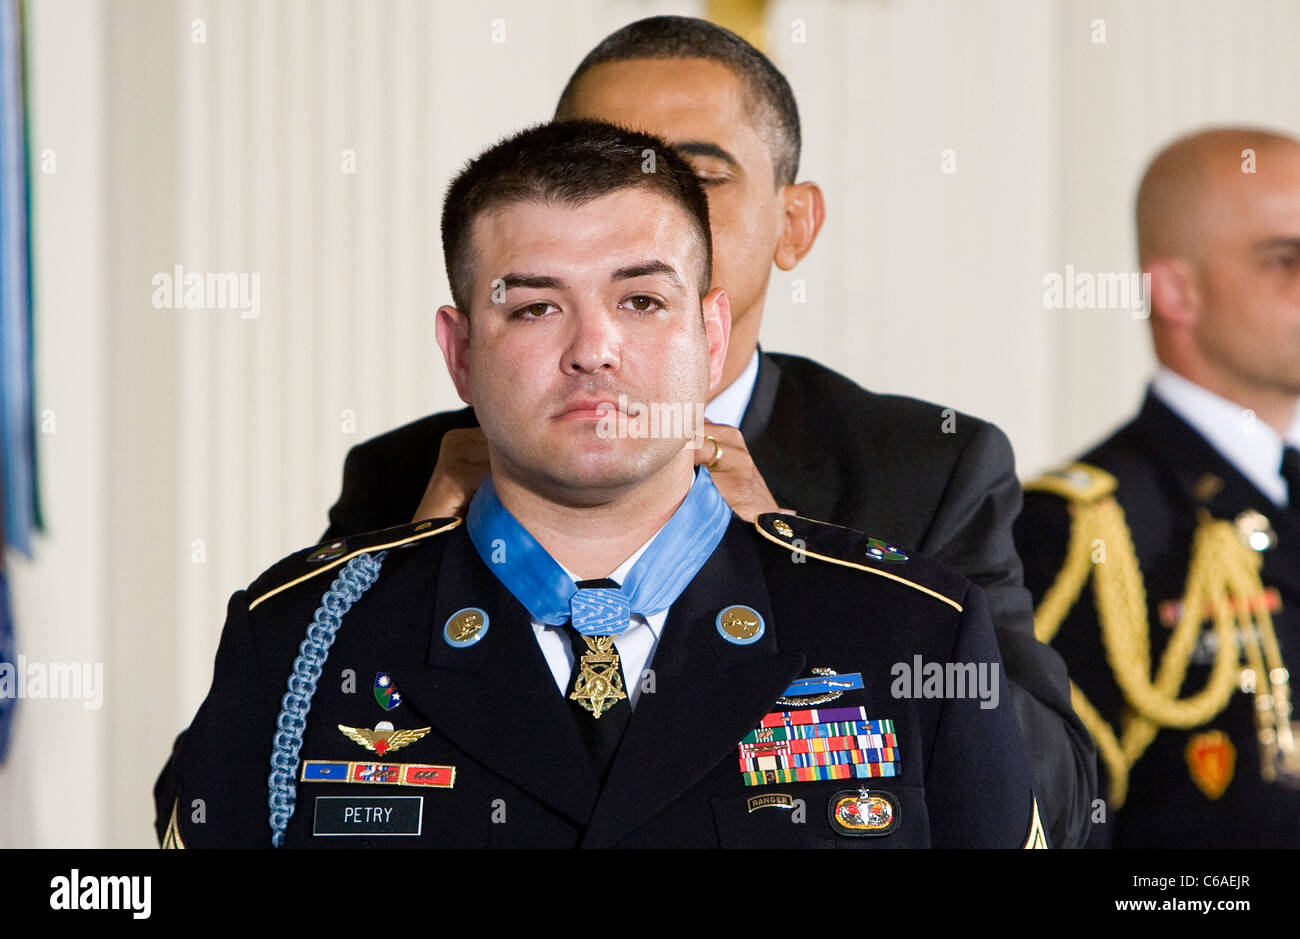 Präsident Barack Obama vergibt die Medal Of Honor an Sergeant First Class Leroy Petry. Stockfoto